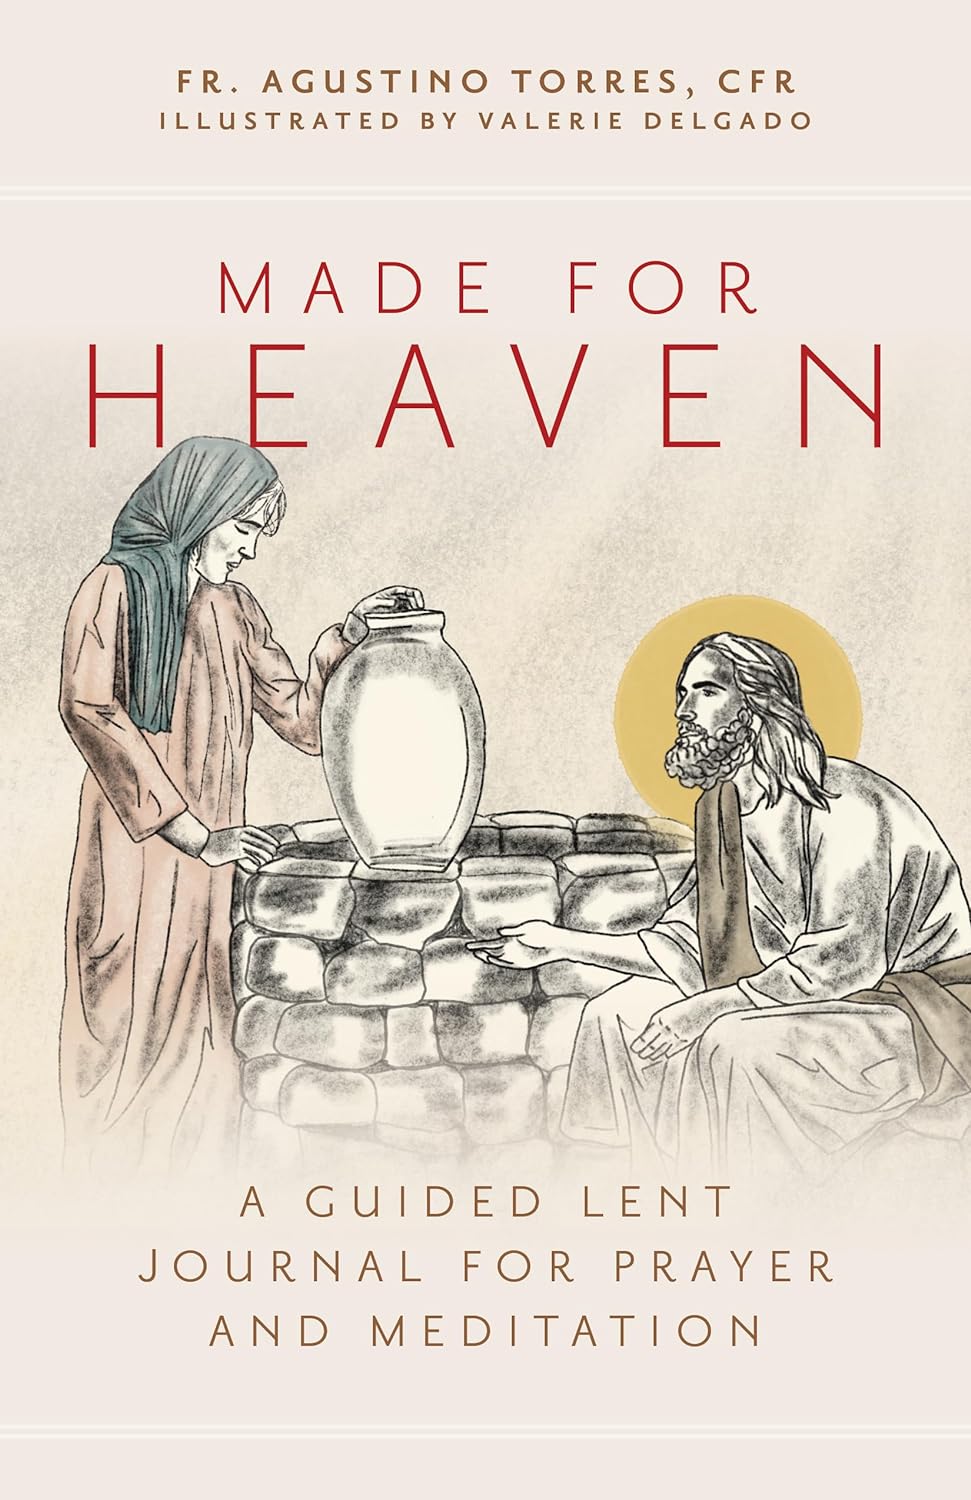 a guided Lent journal